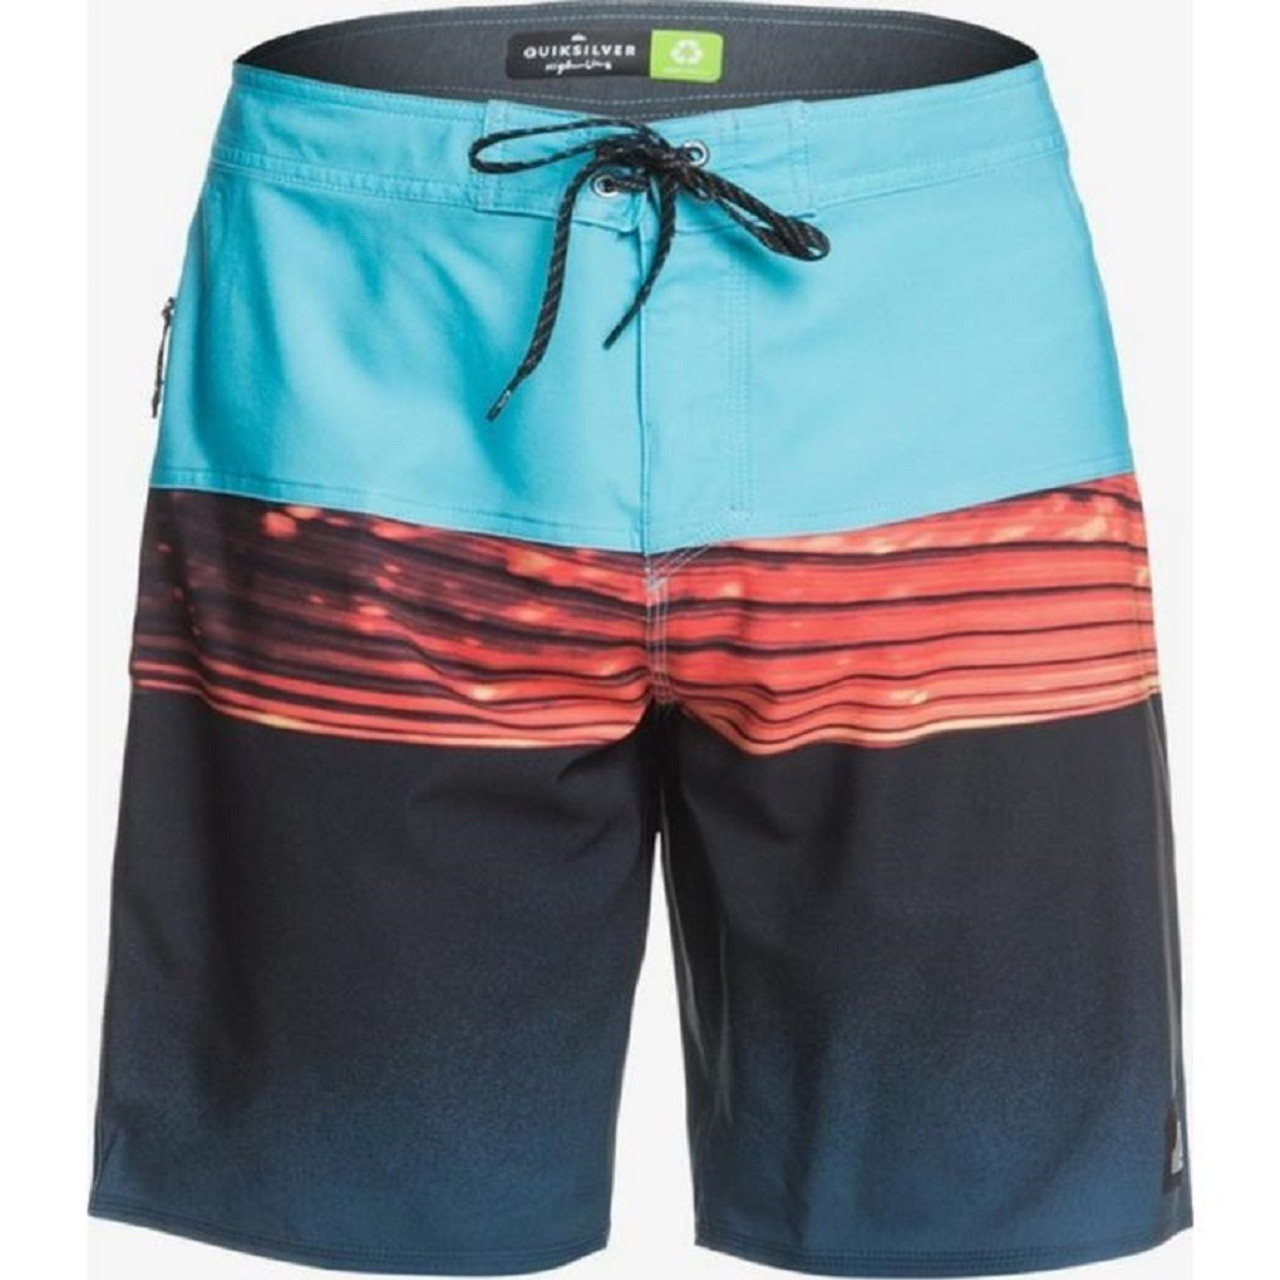 Quiksilver Hold Down Trunks Turquoise